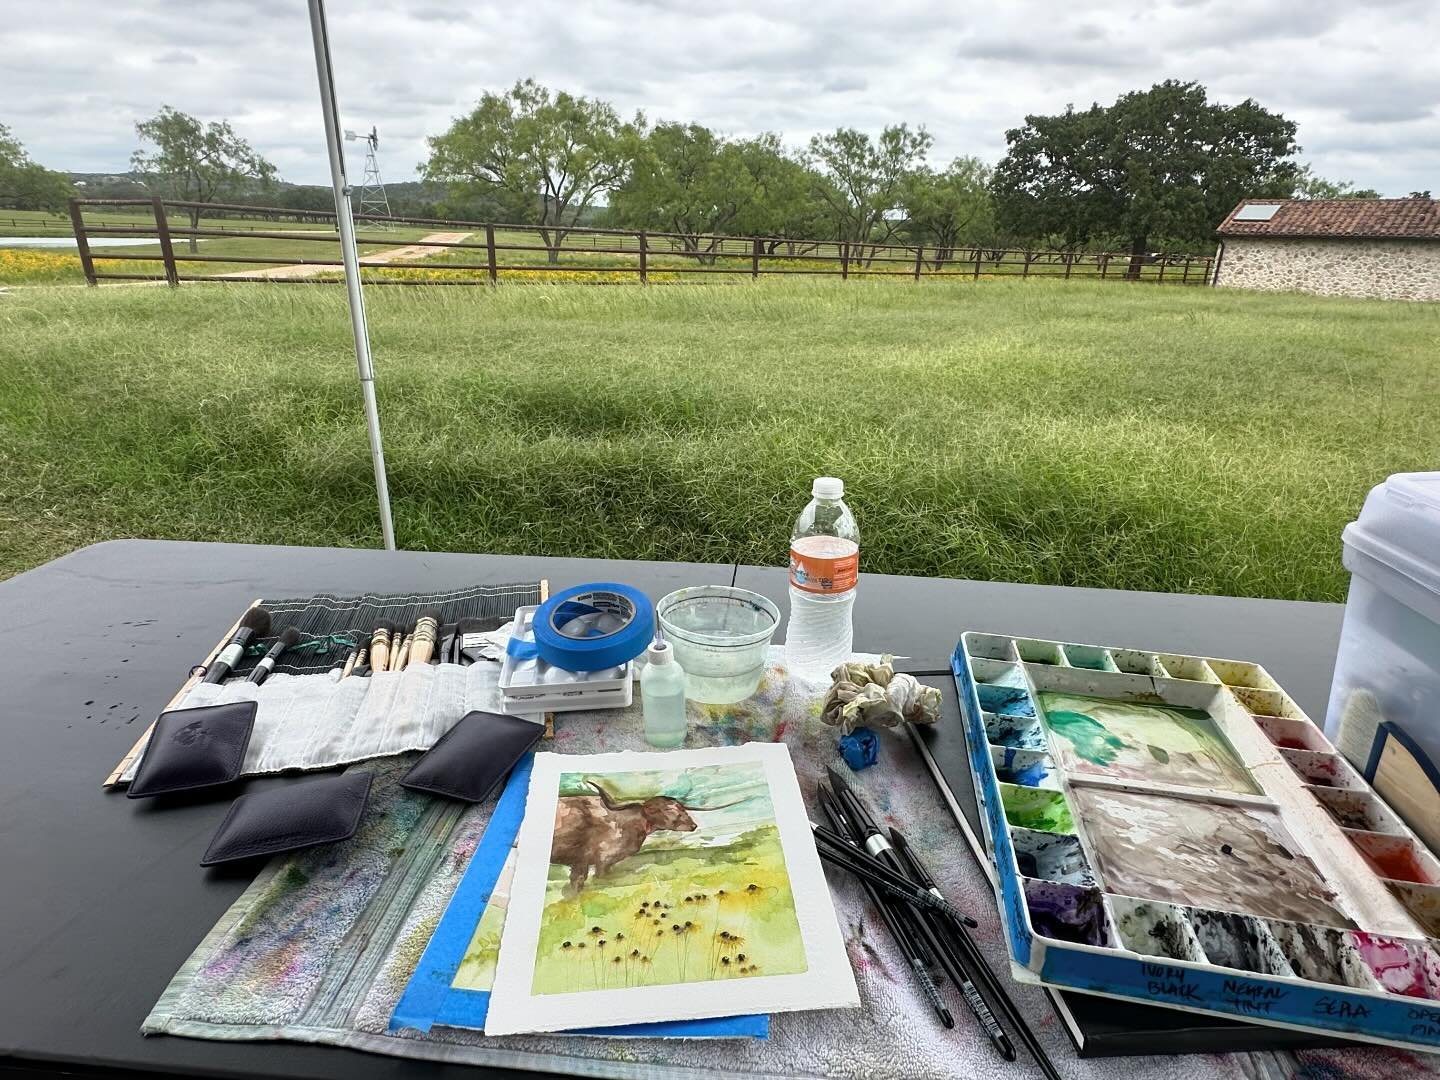 Longhorn day at the ranch! I think I better stick to flowers. But boy are they big and interesting animals! @highlandlakescreativearts  #pleinairtexas #watercolor #watercolorpainting 🤠